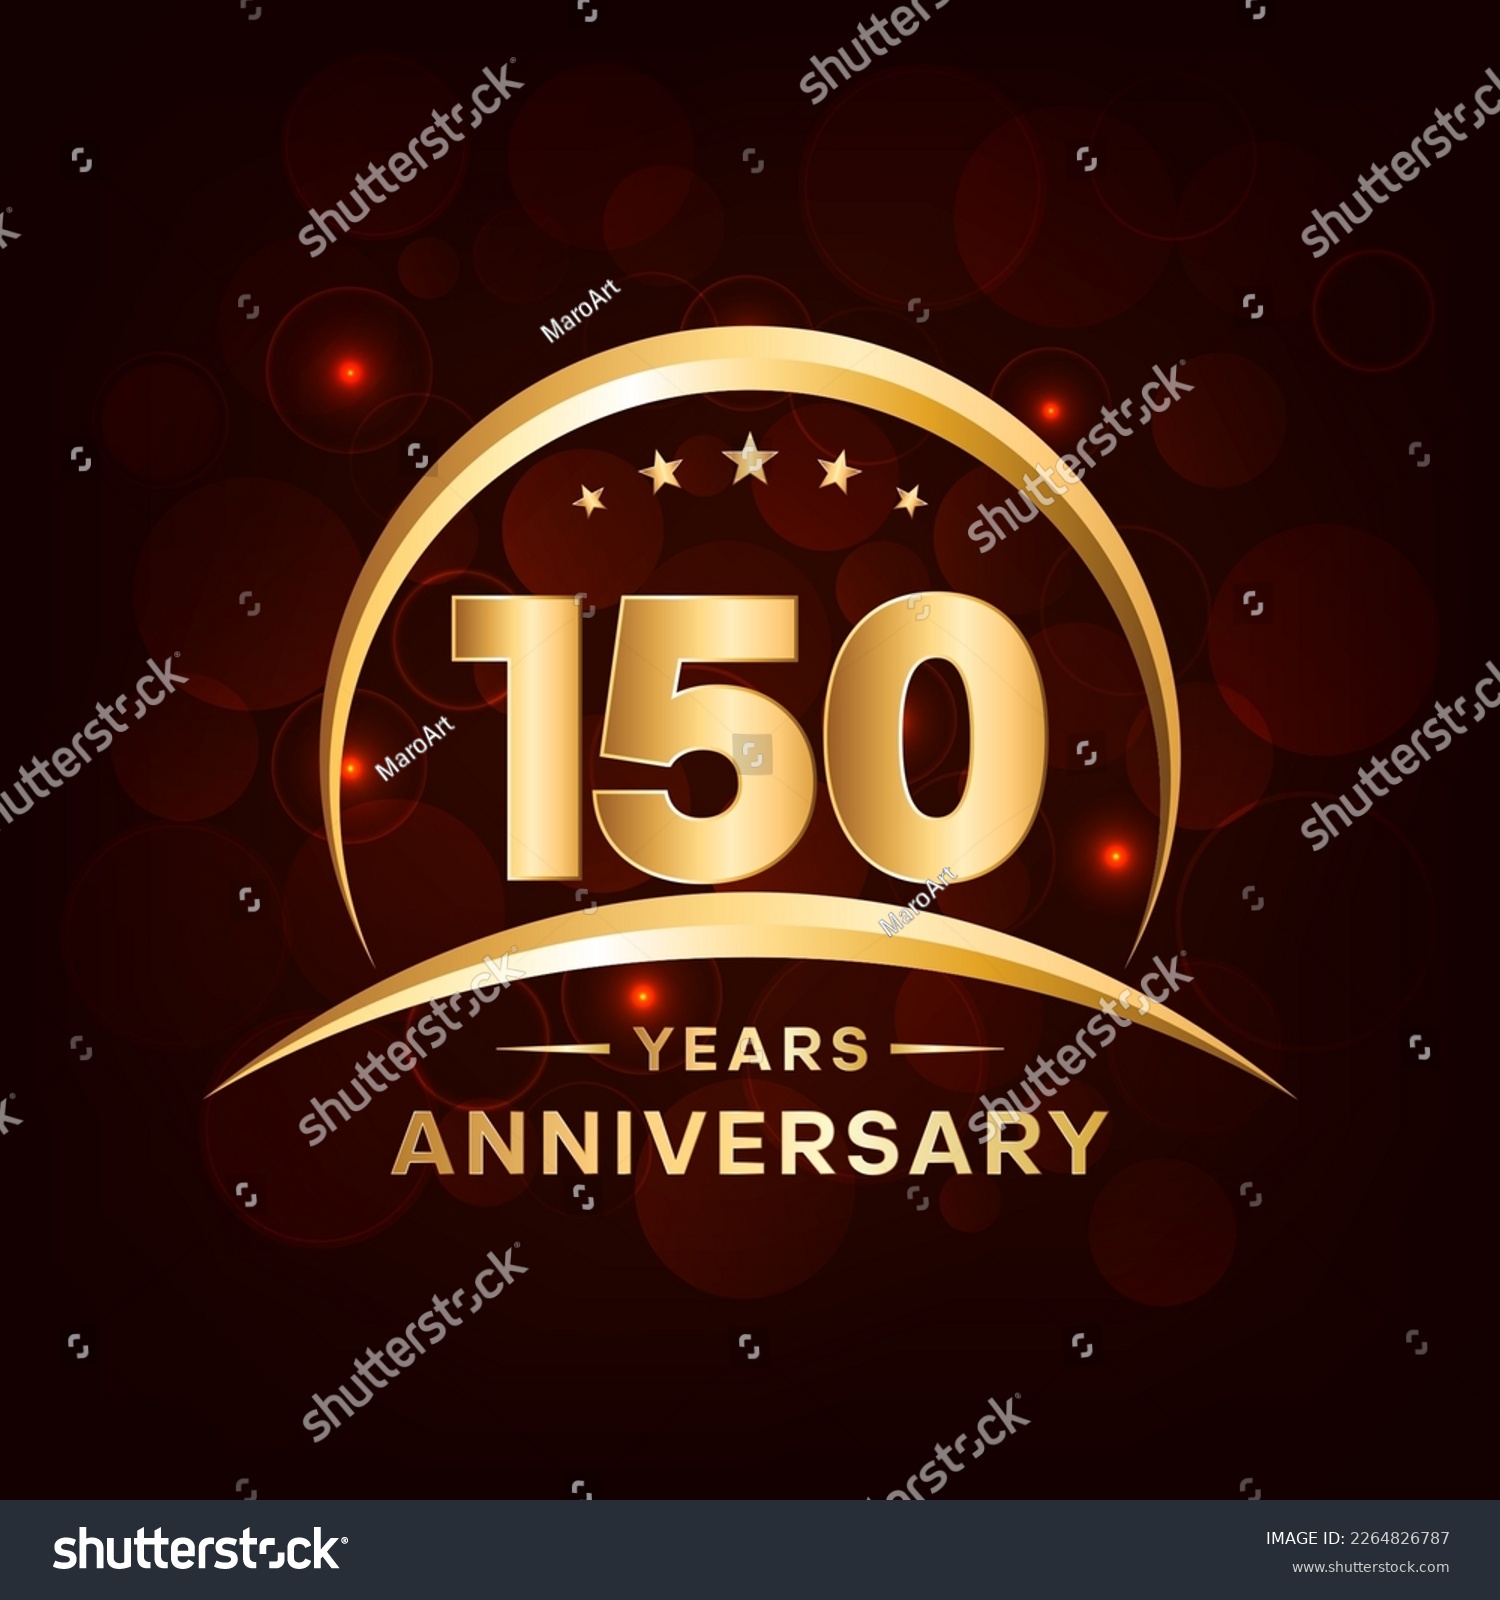 150th Anniversary. Anniversary logo design with - Royalty Free Stock ...